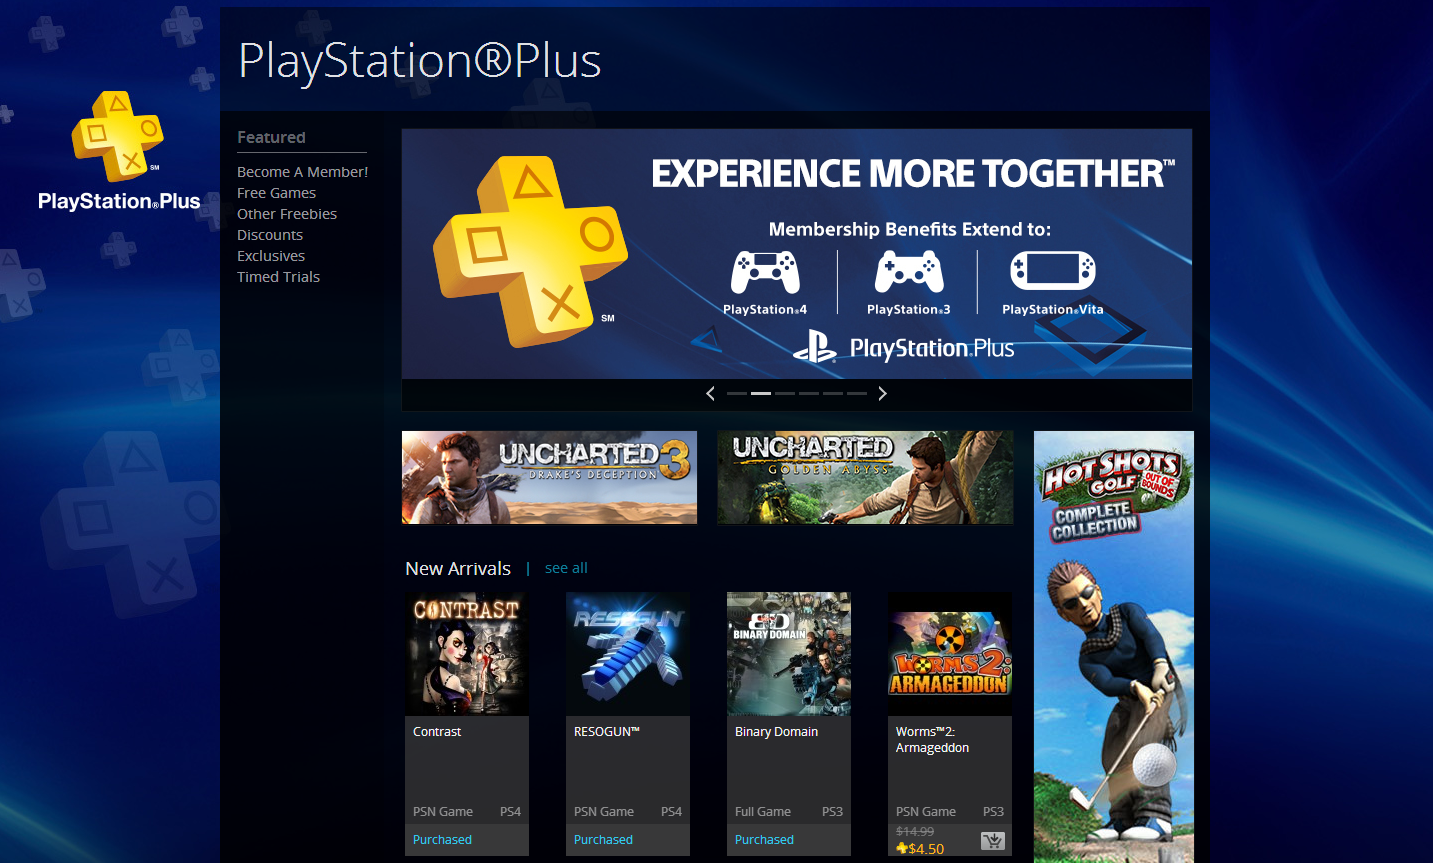 How to Redeem Playstation Plus PS4 Games Before Getting Your Console